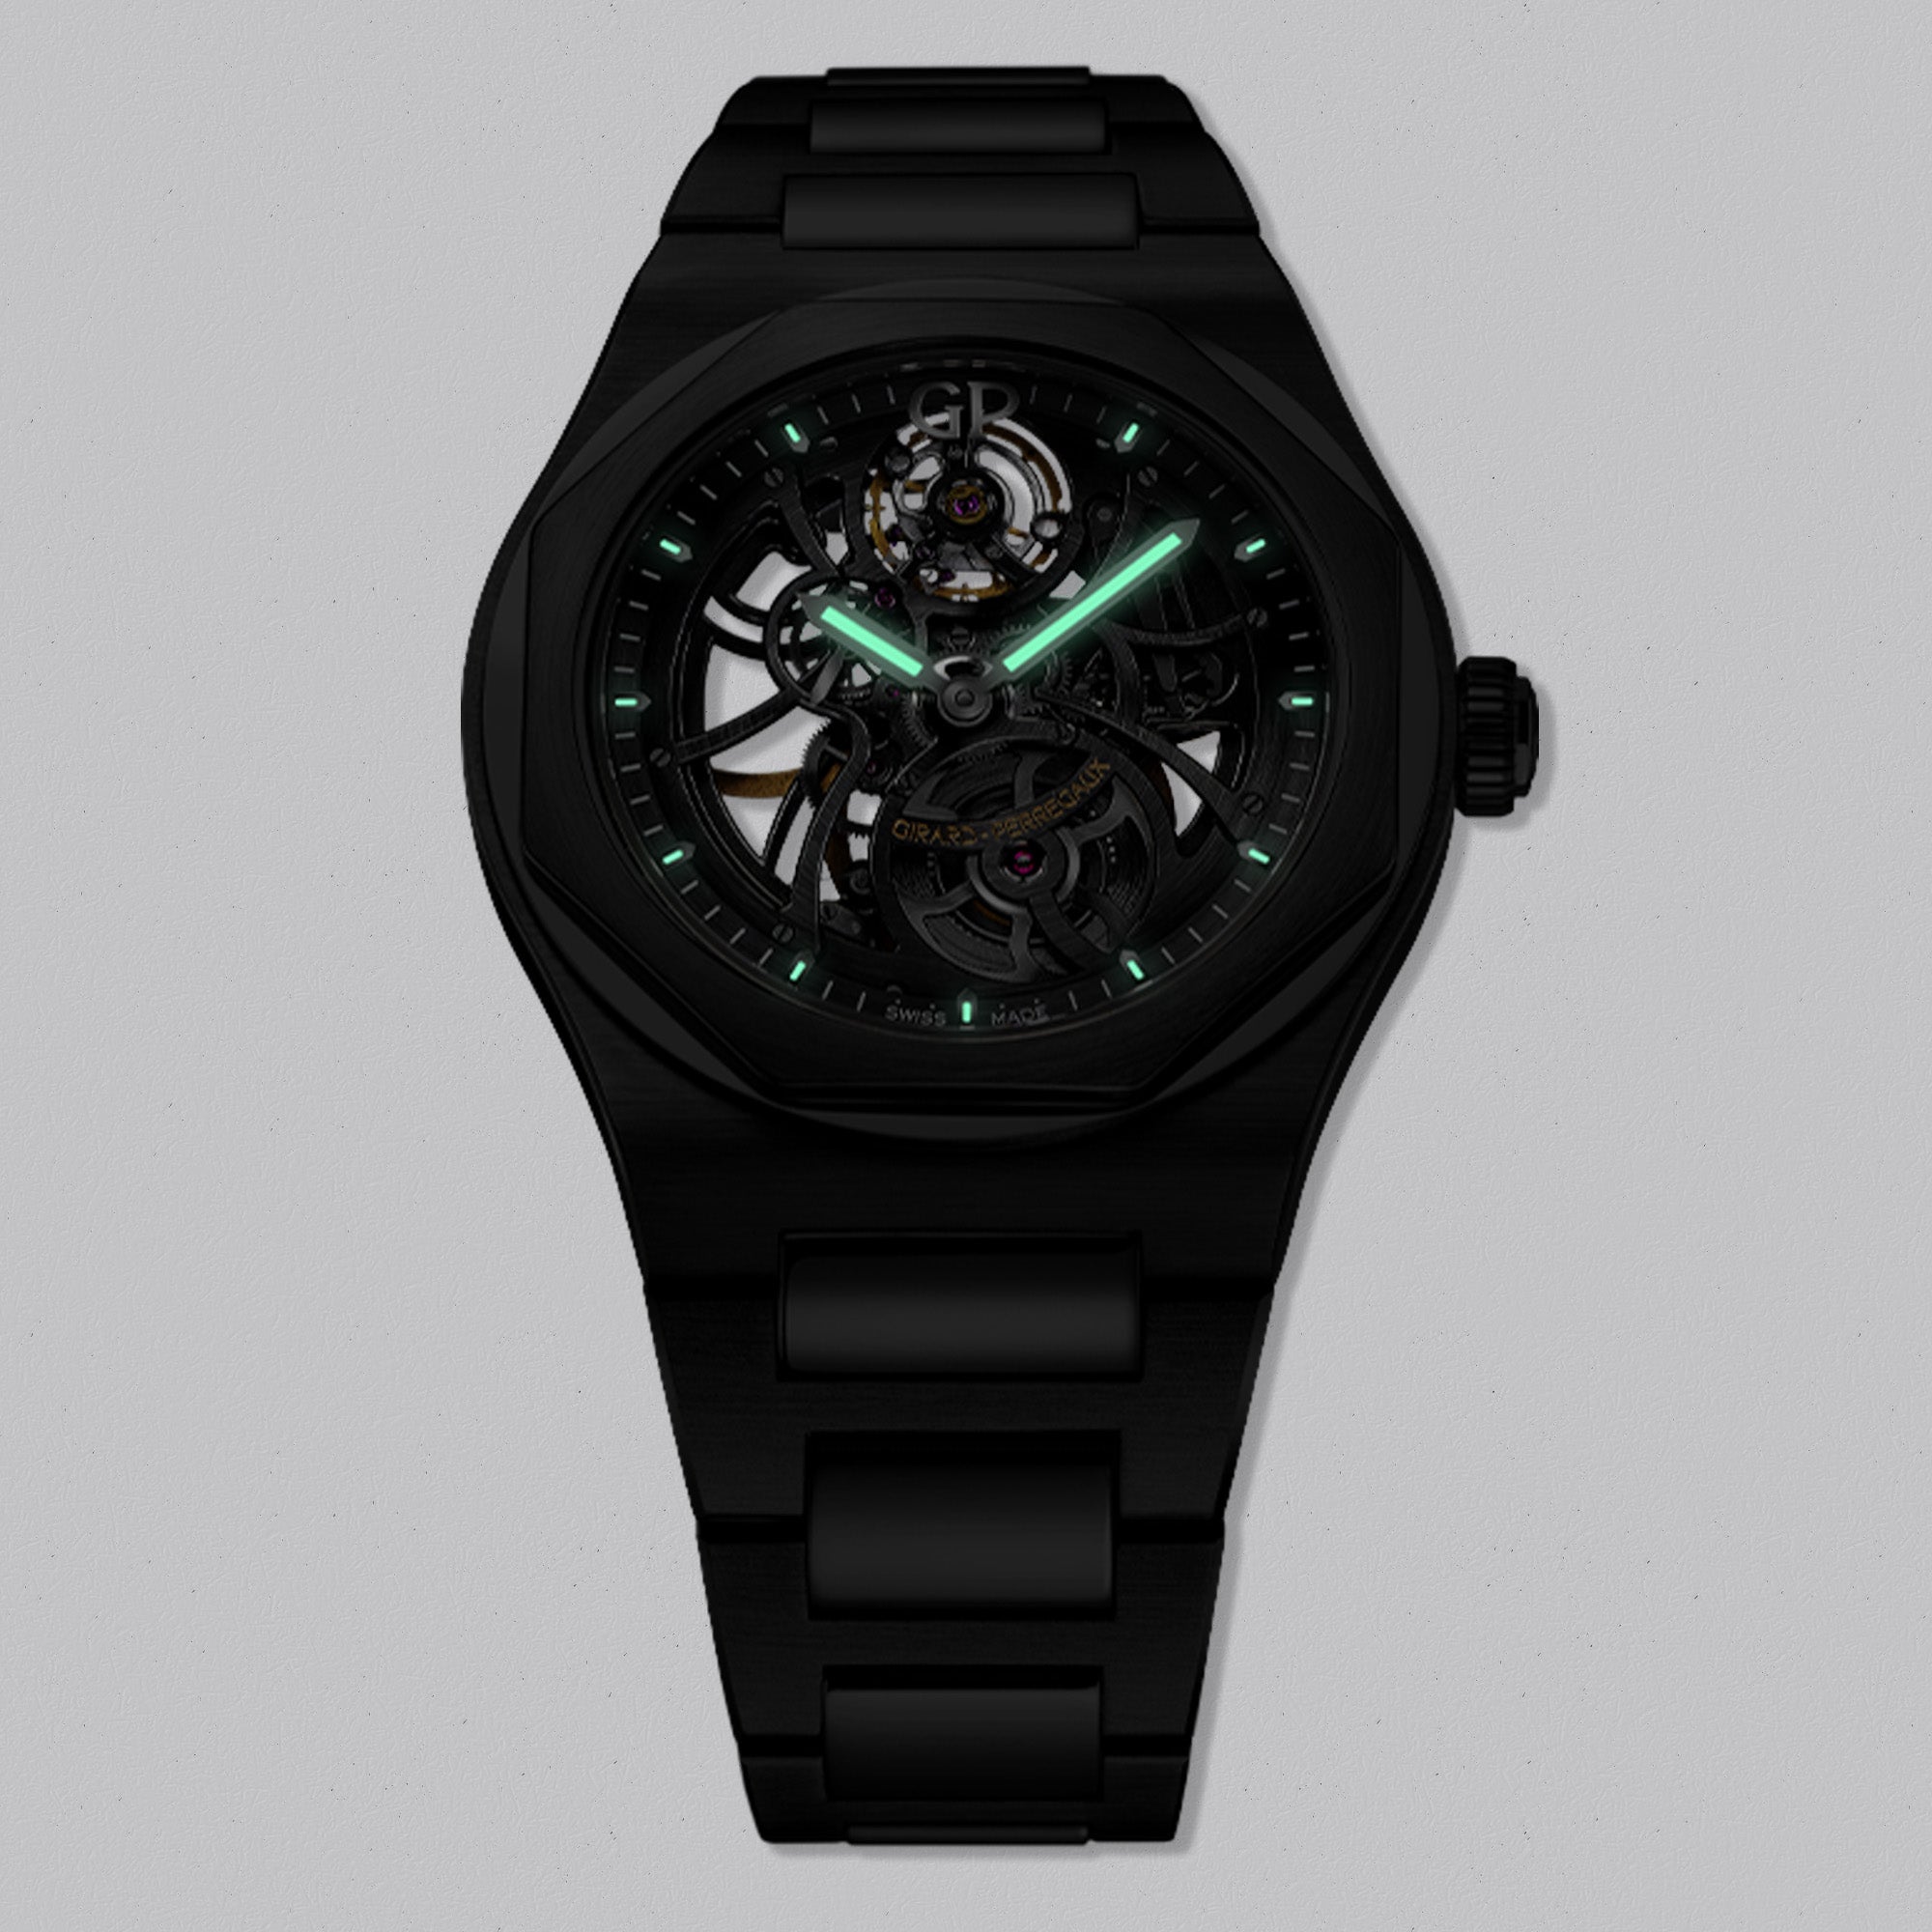 laureato-stell-skeleton-42mm-81015-11-0011-11a-lume